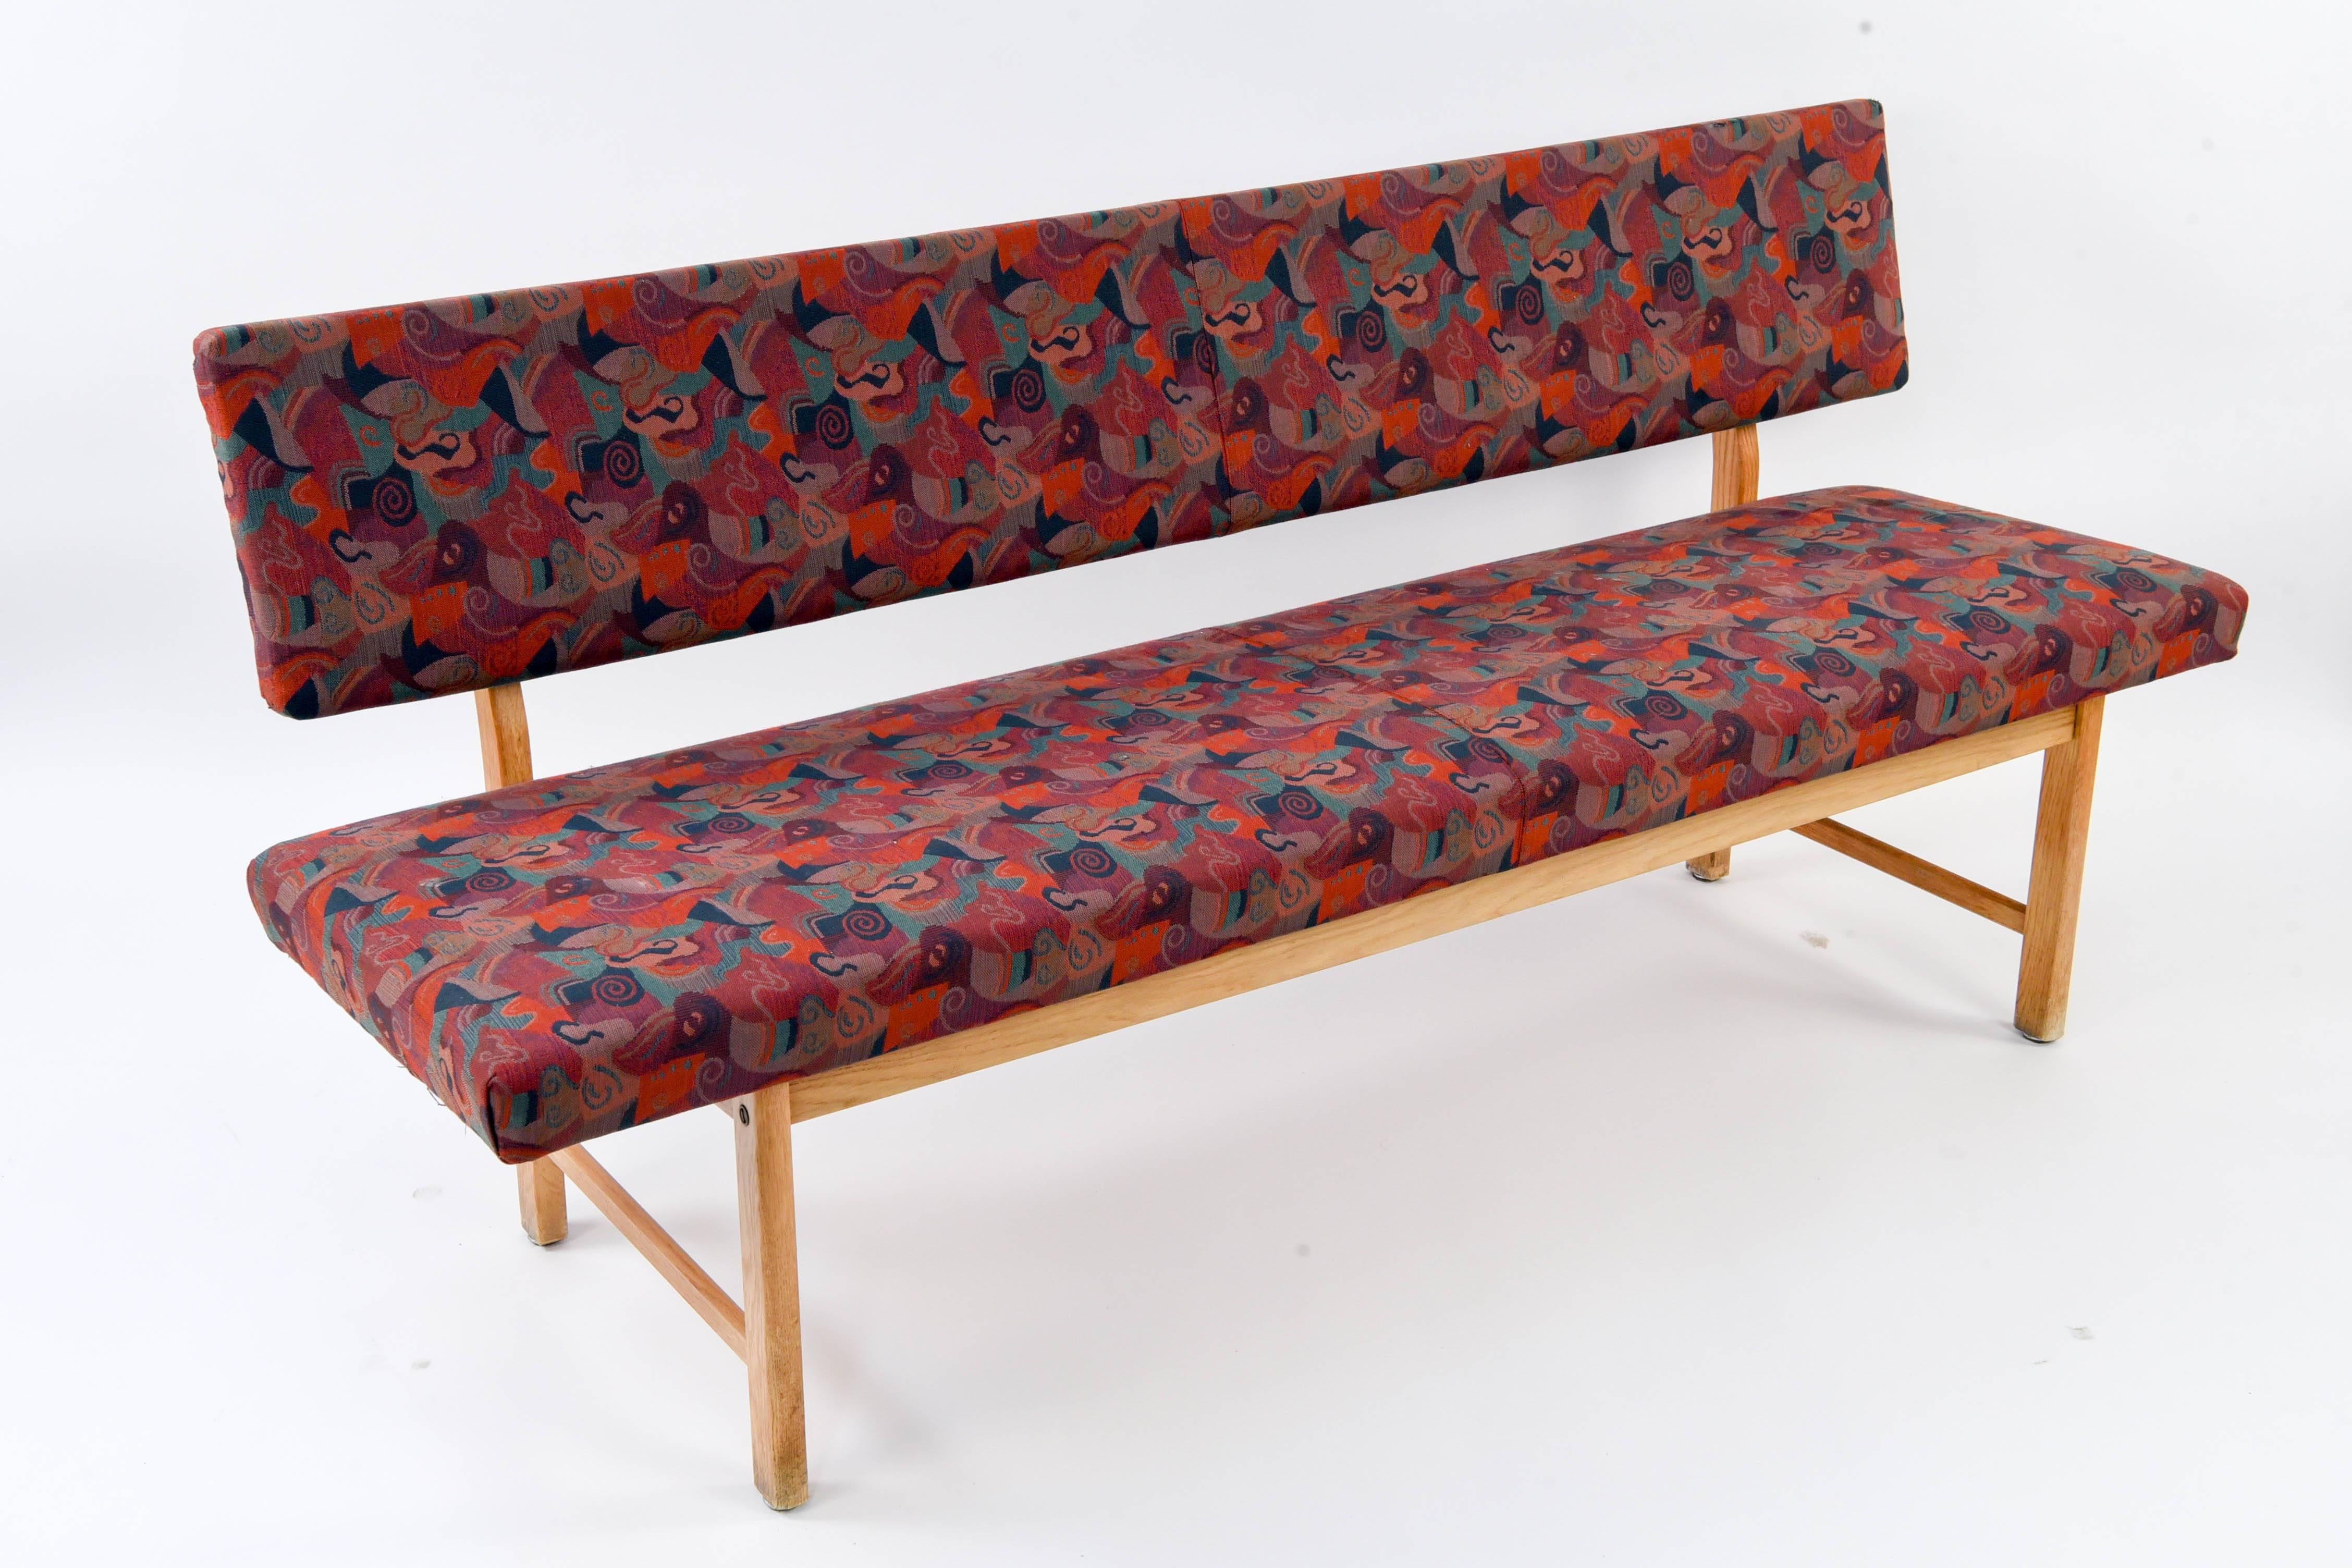 This Danish midcentury bench features retro upholstery t1hat could be kept or changed to fit the aesthetic of any living space. Has a great shape made of oakwood.